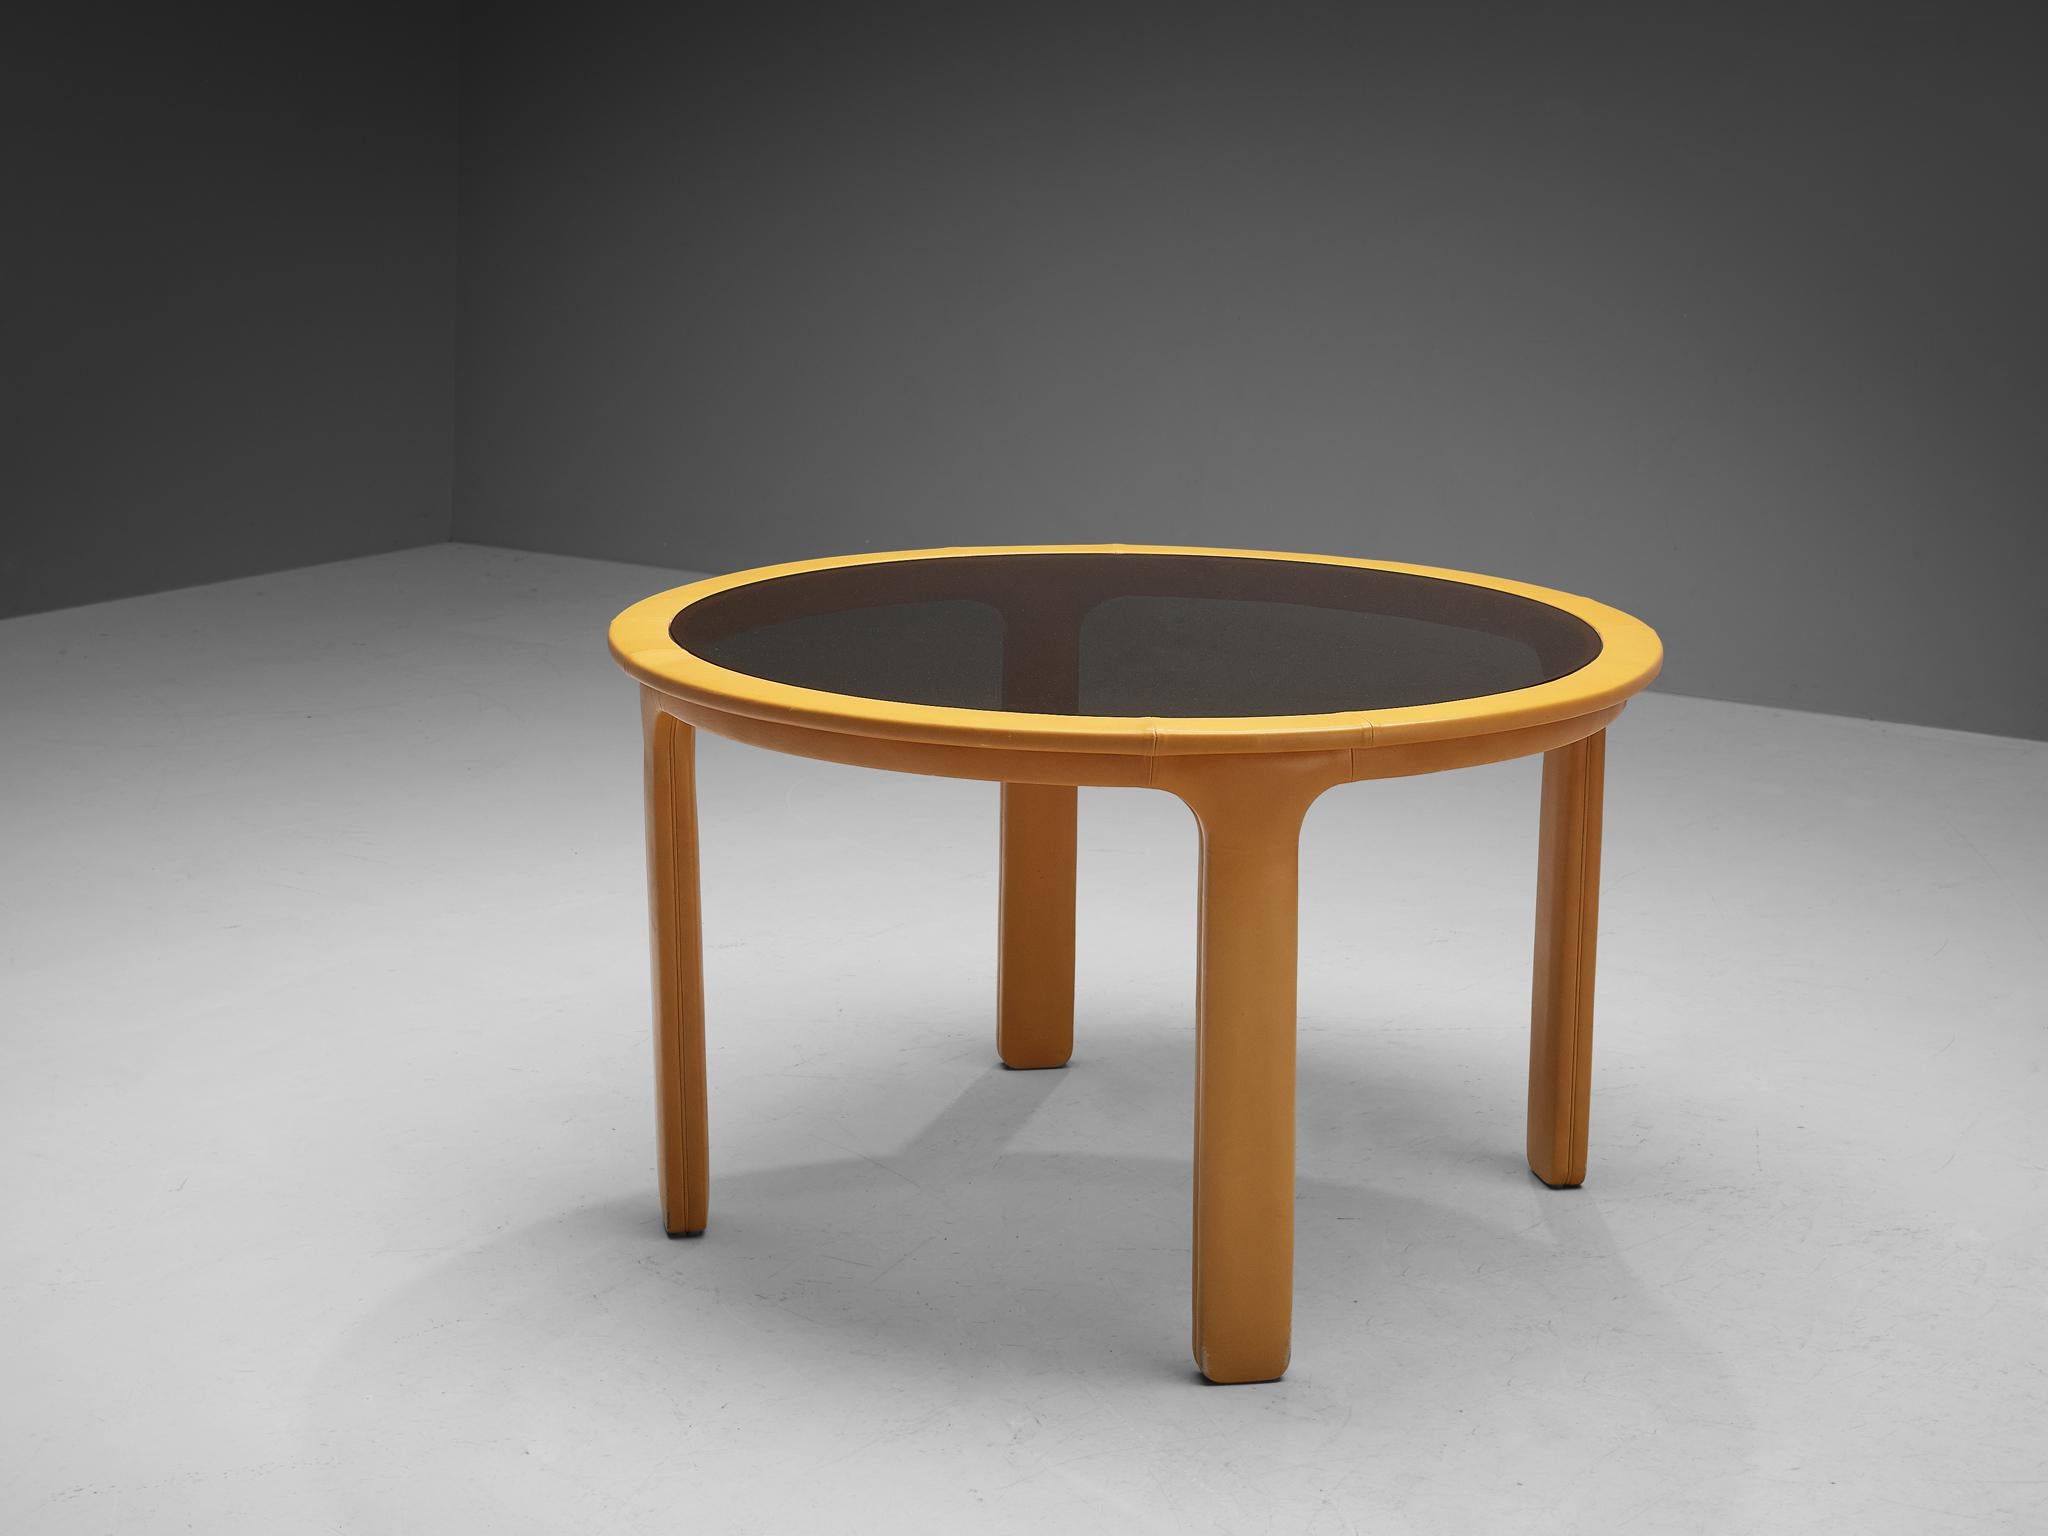 Luigi Massoni for Poltrona Frau, dining table, leather, smoked glass, Italy, 1970s

Eccentric round dining table designed by Italian designer Luigi Massoni for Poltrona Frau. Its design truly radiates the seventies era. The frame is upholstered